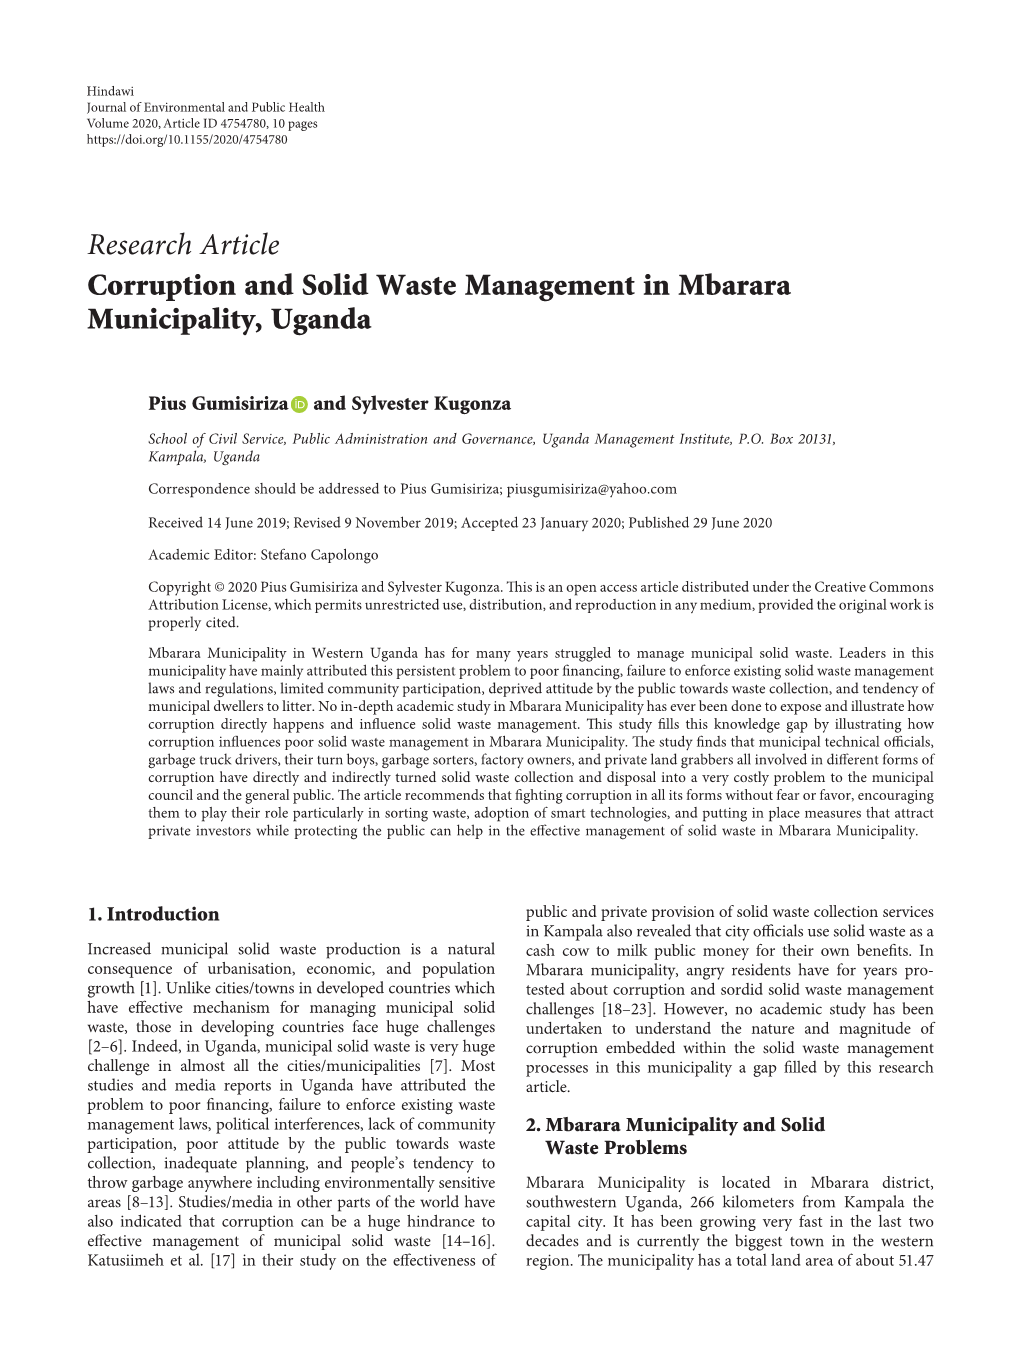 Research Article Corruption and Solid Waste Management in Mbarara Municipality, Uganda